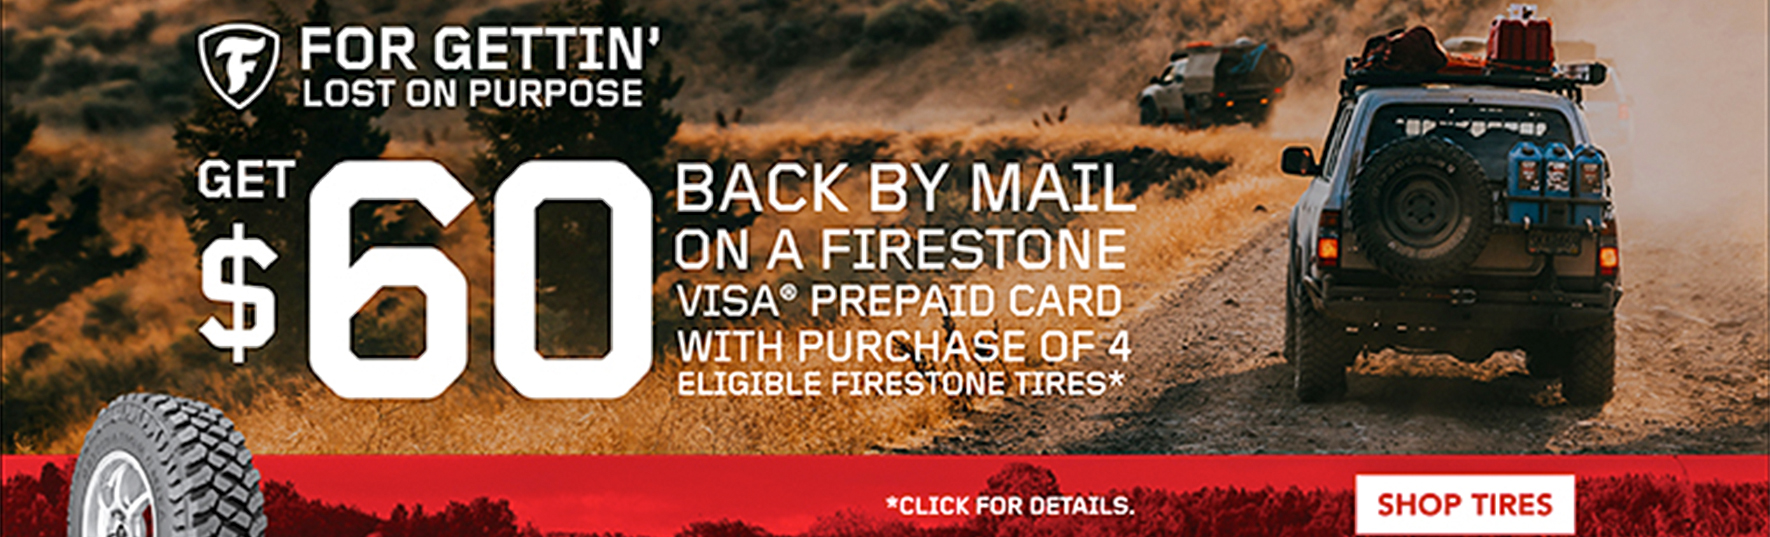 Firestone - GET UP TO $90 BACK BY MAIL ON A FIRESTONE PREPAID CARD!